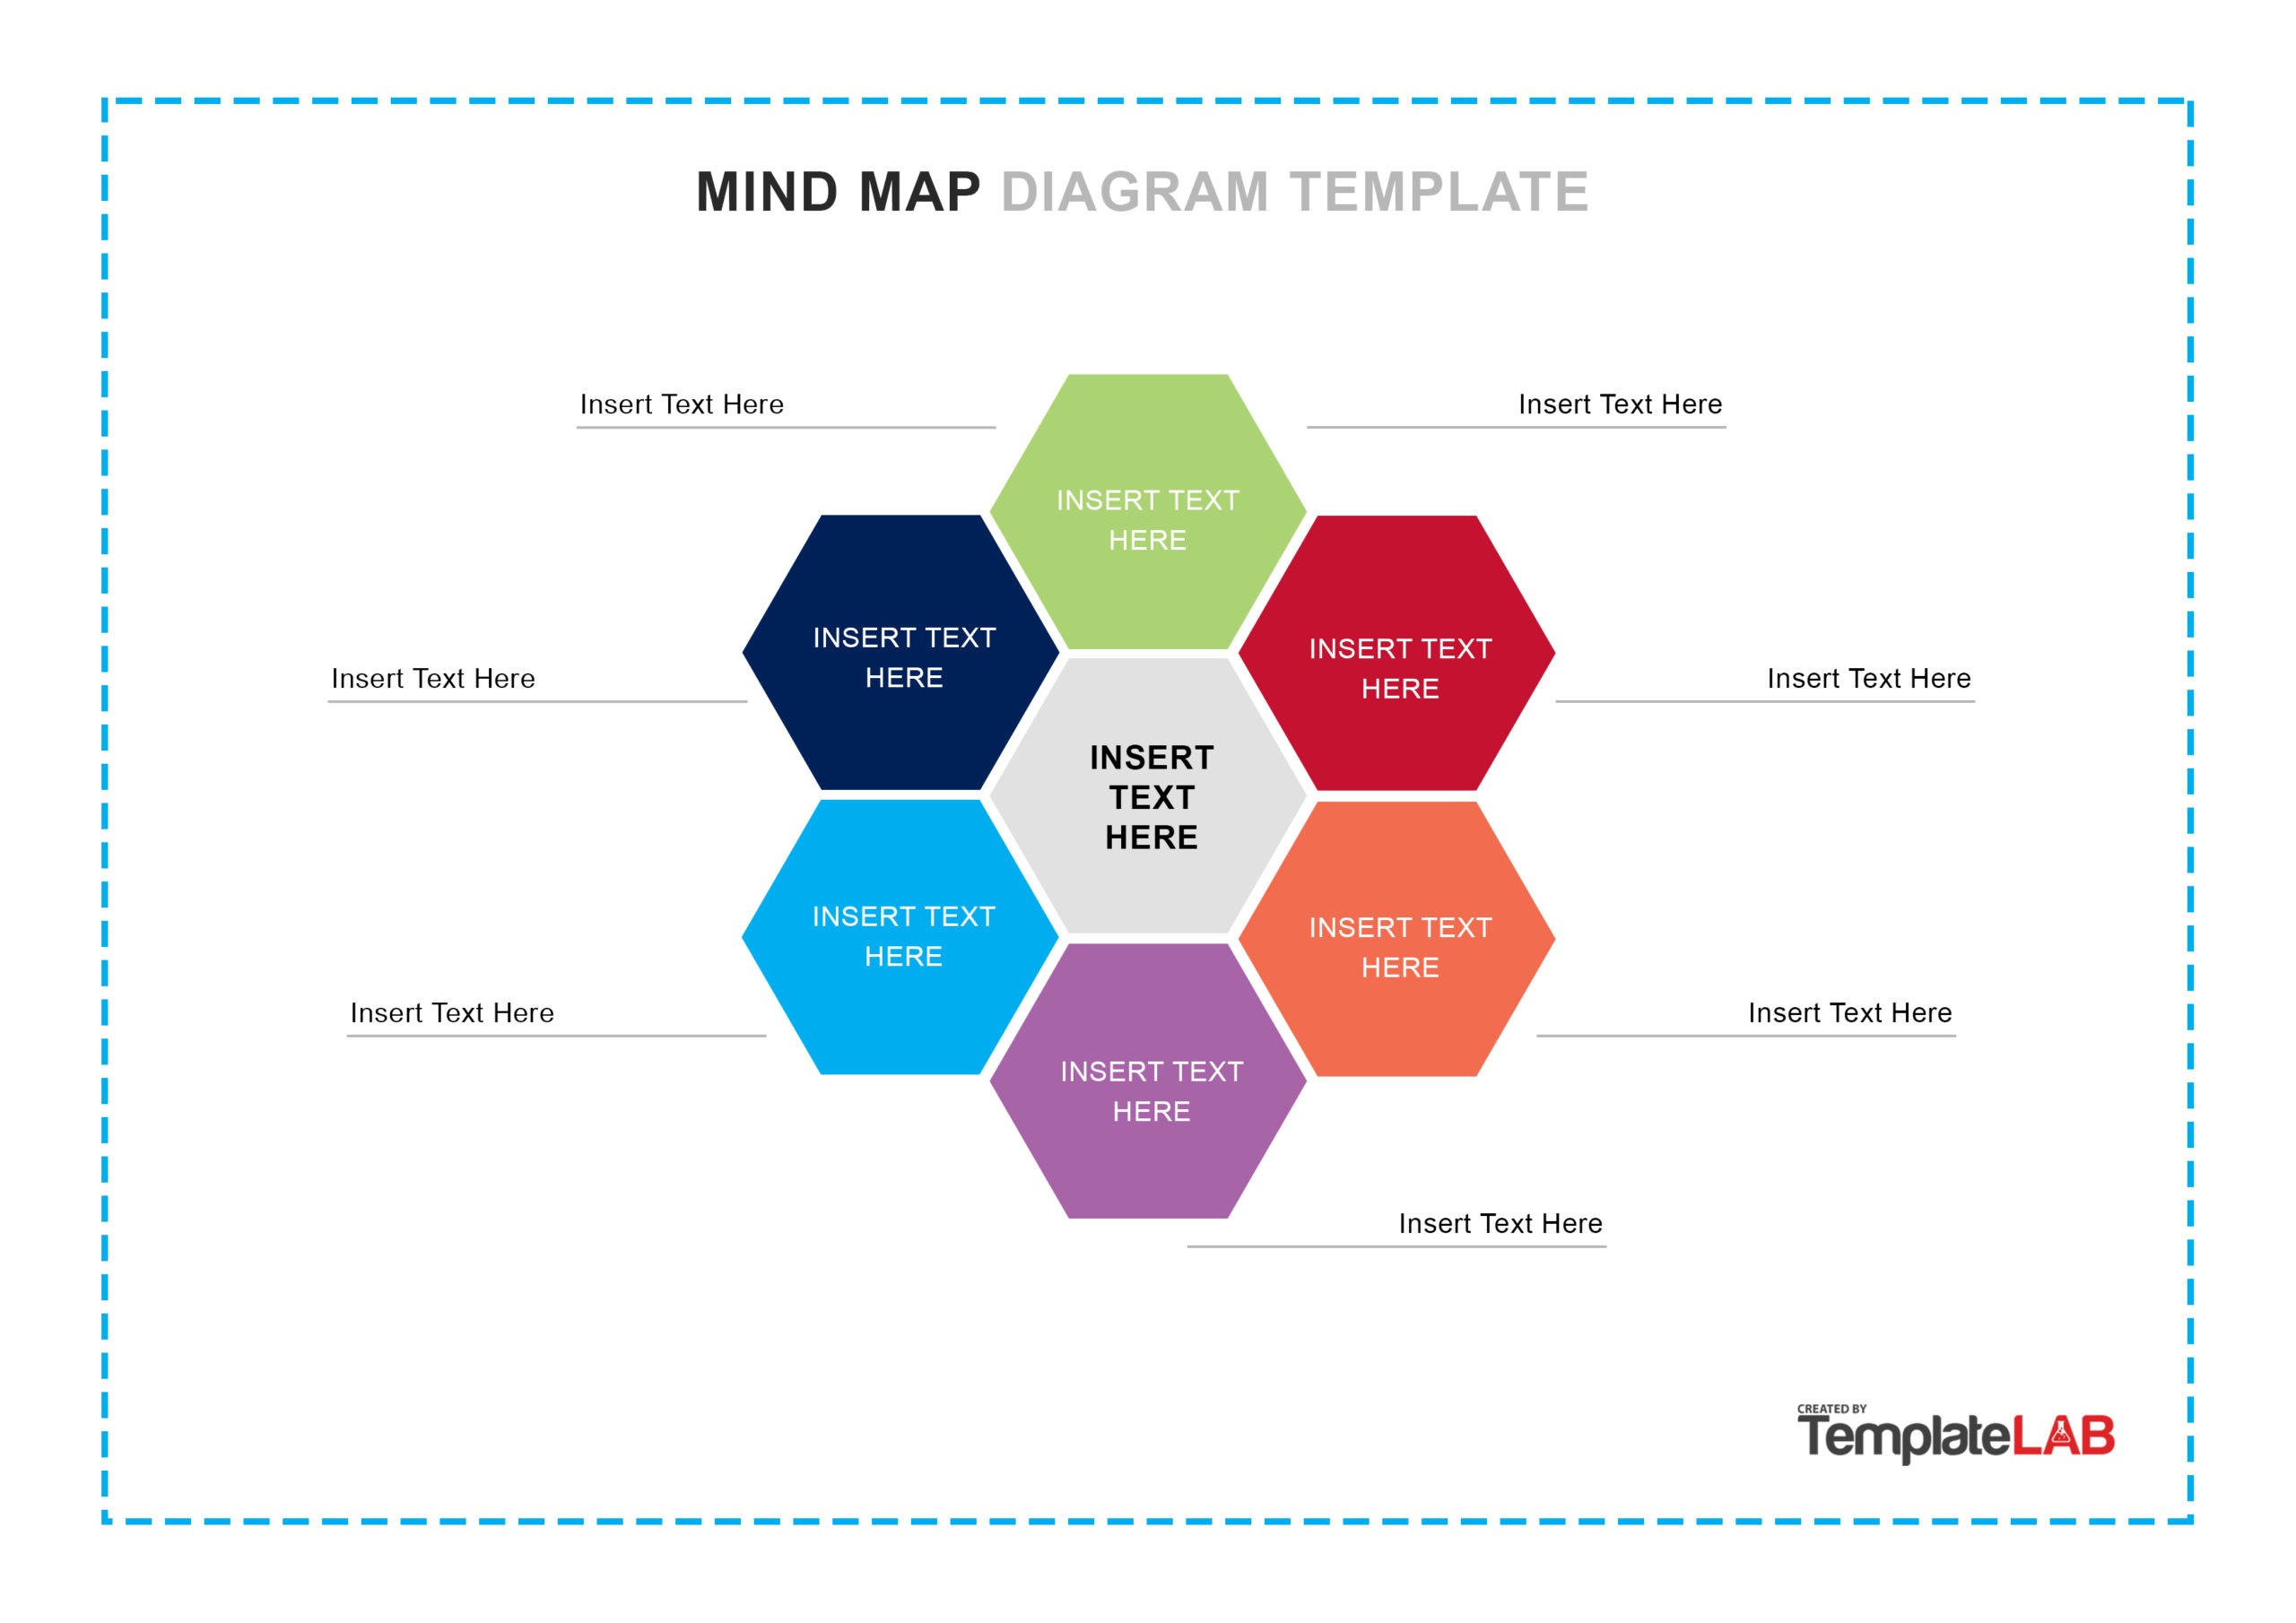 37 Free Mind Map Templates Examples (Word PowerPoint PSD)